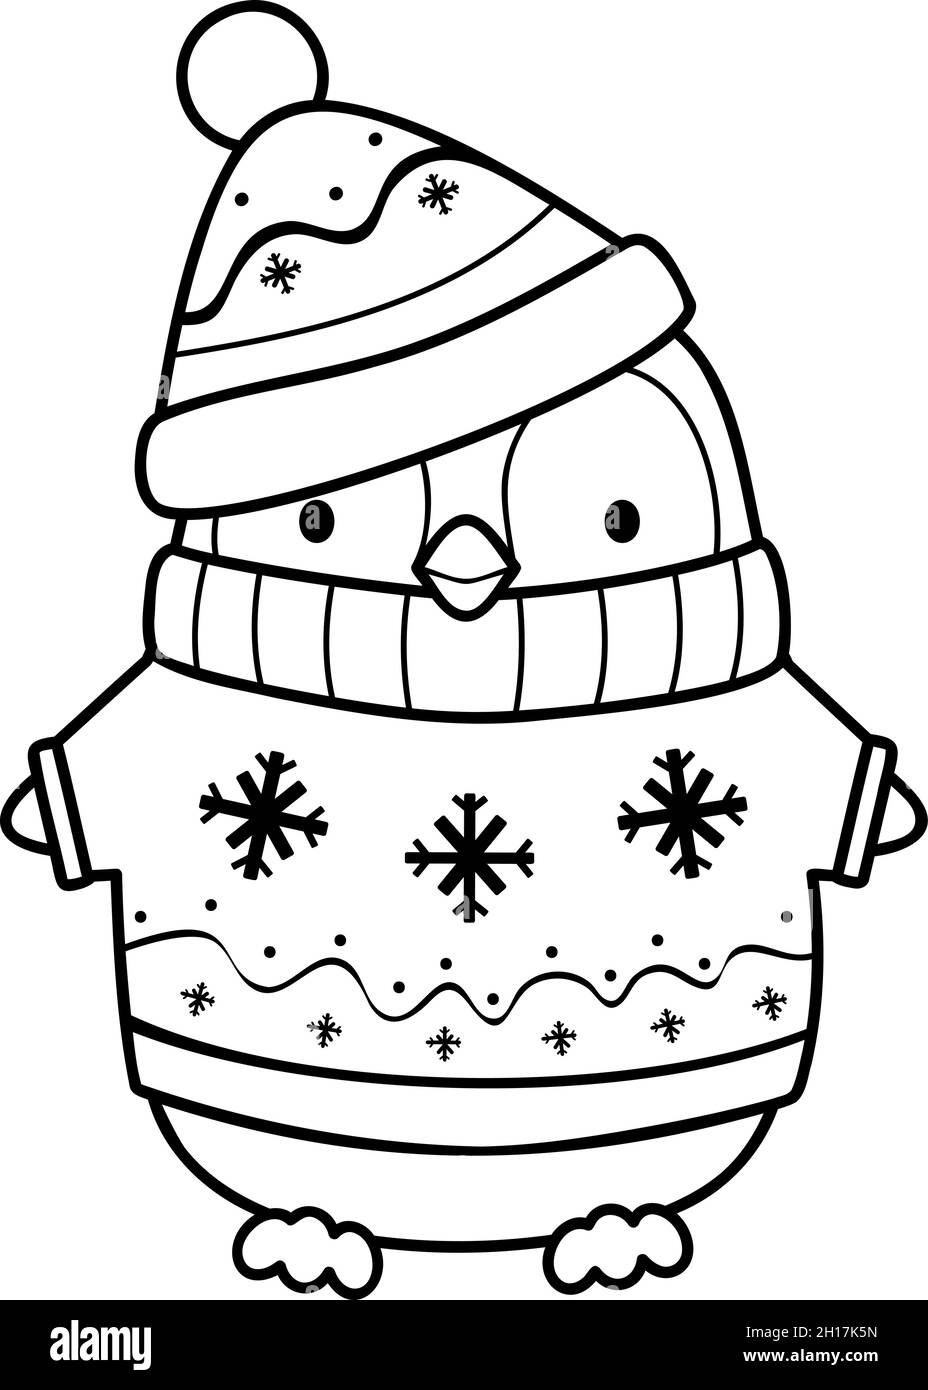 Christmas coloring book or page. Christmas penguin black and white ...